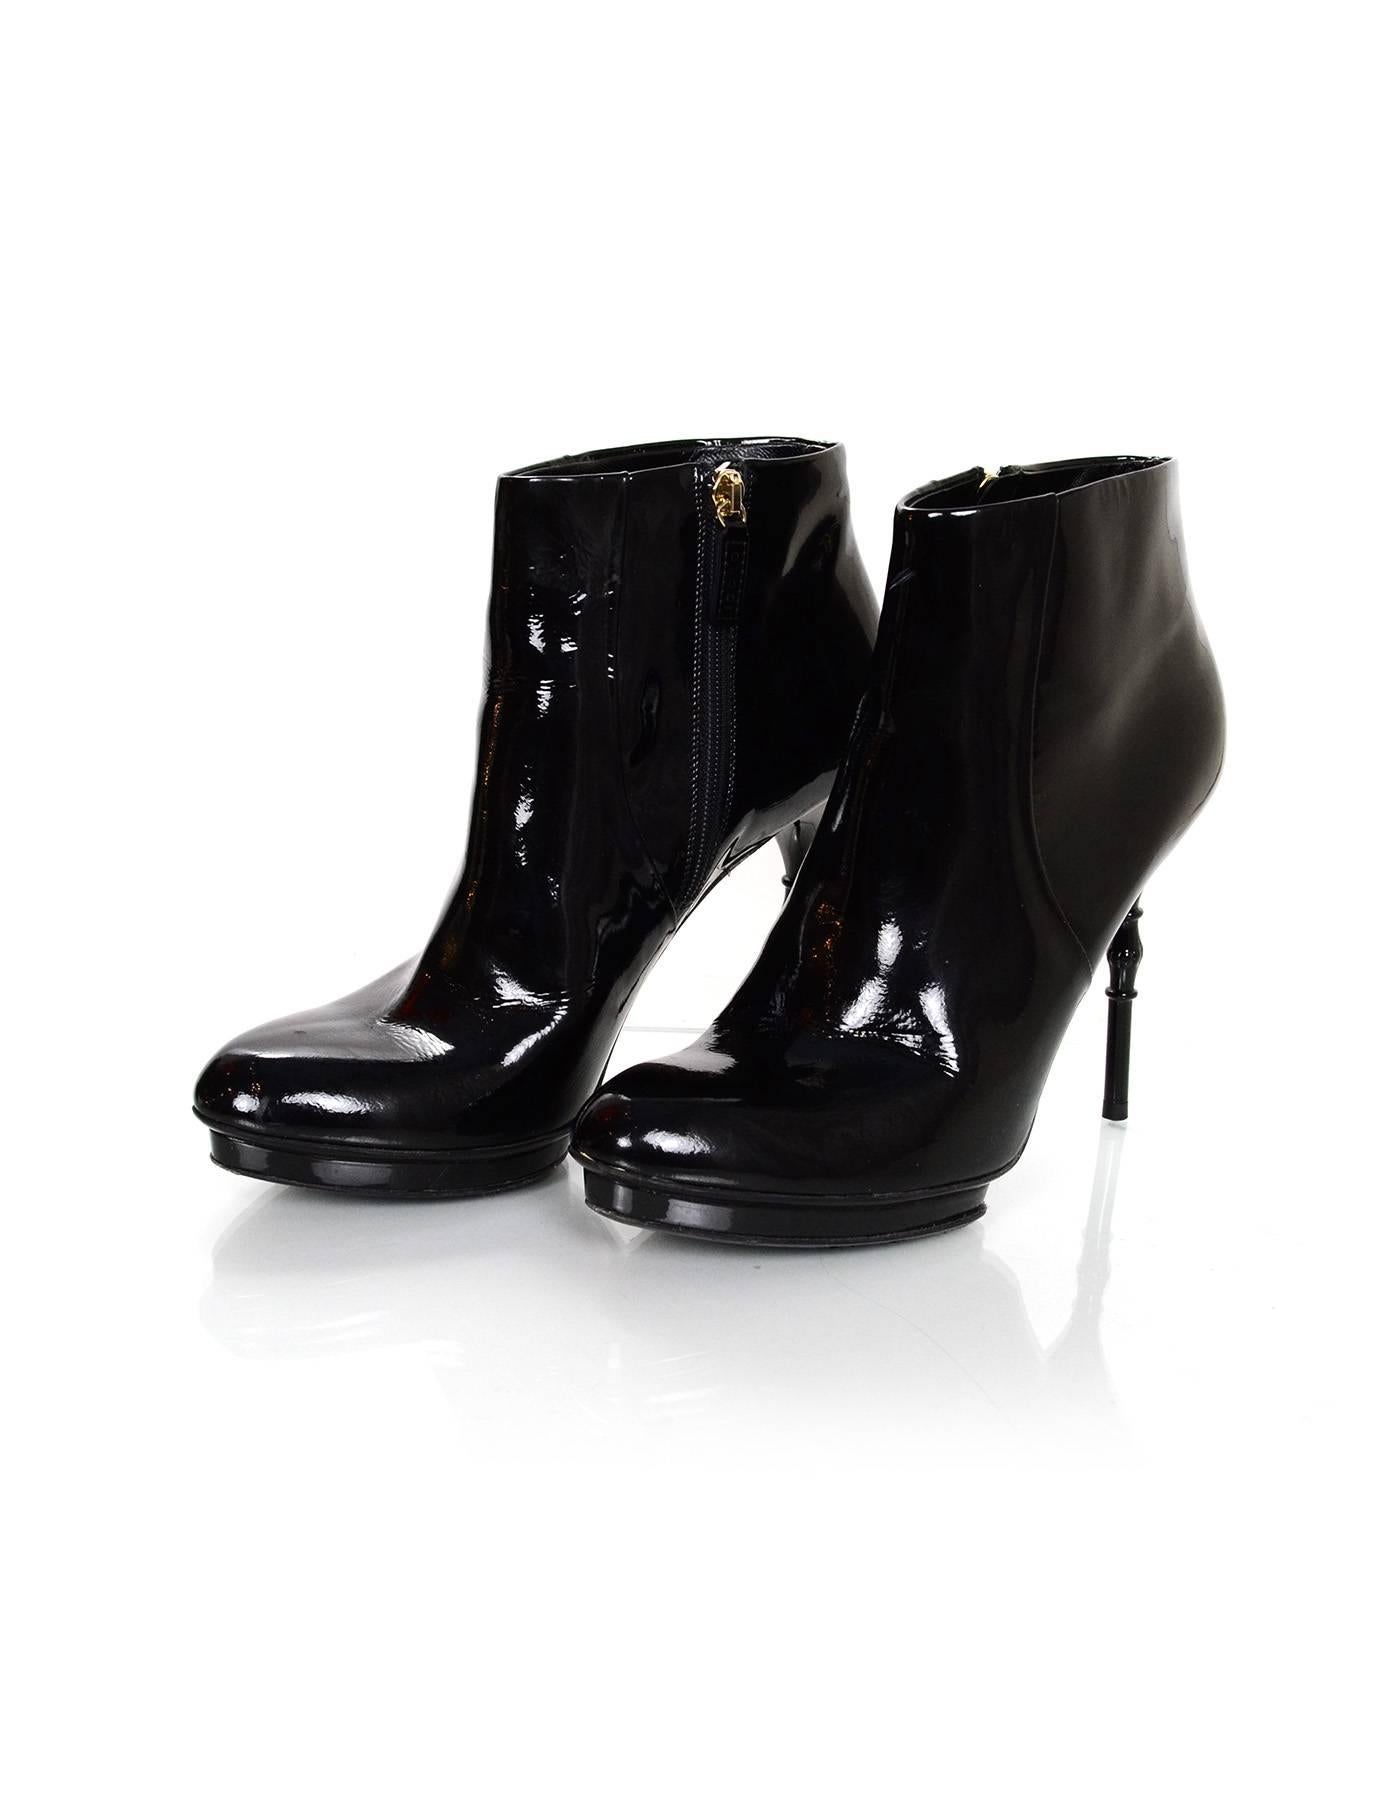 Gucci Black Patent Vitello Vernice Ankle Boots Sz 37

Made In: Italy
Color: Black
Materials: Patent leather
Closure/Opening: Zipper closure
Sole Stamp: Gucci Made in Italy 37
Overall Condition: Excellent pre-owned condition with the exception of